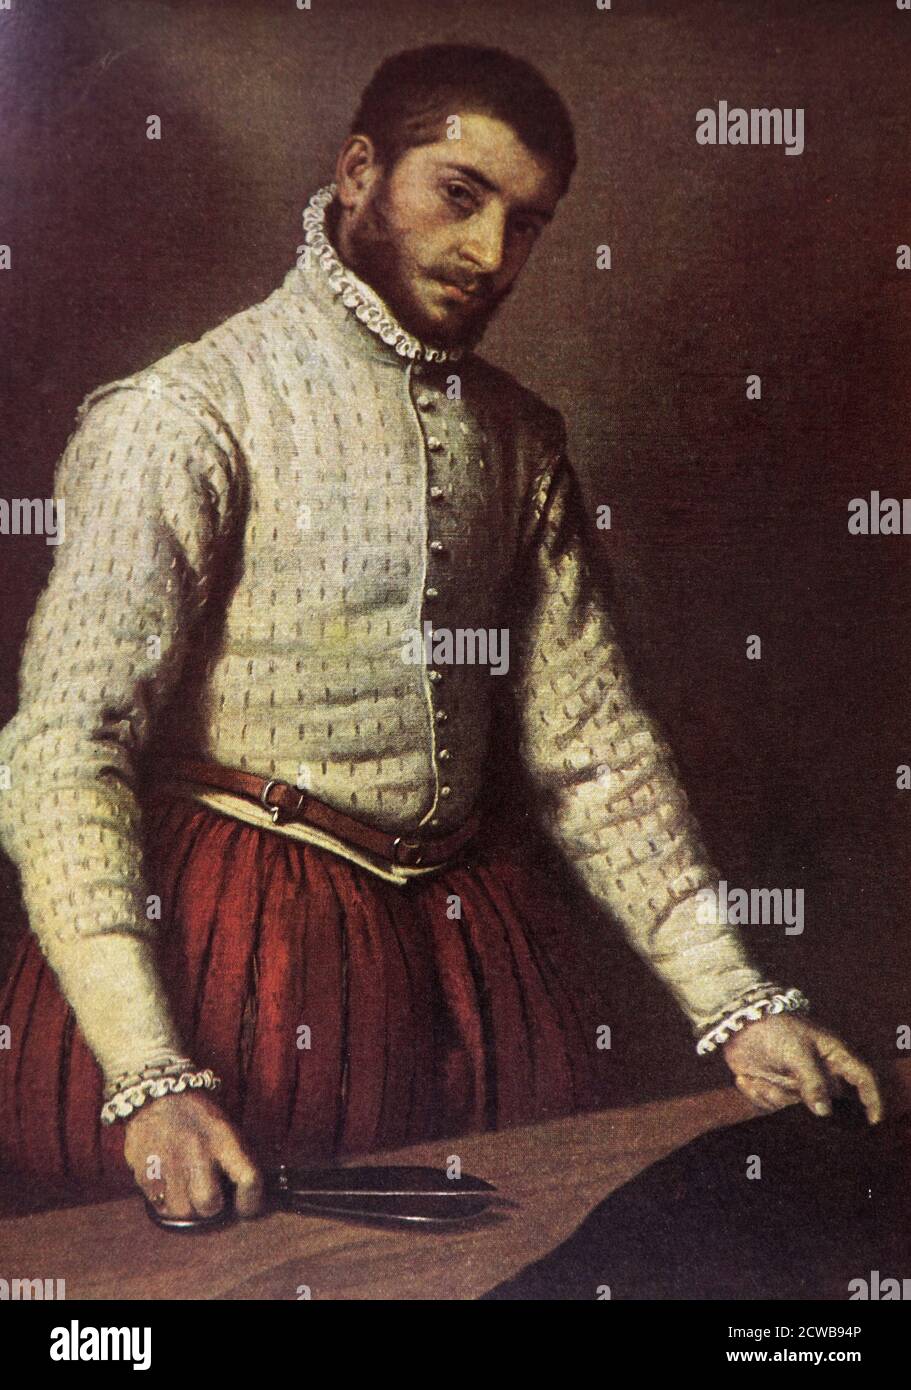 Painting titled 'The Tailor' by Giovanni Battista Moroni. Giovanni Battista Moroni (1520-1578) an Italian painter of the Late Renaissance period. Stock Photo